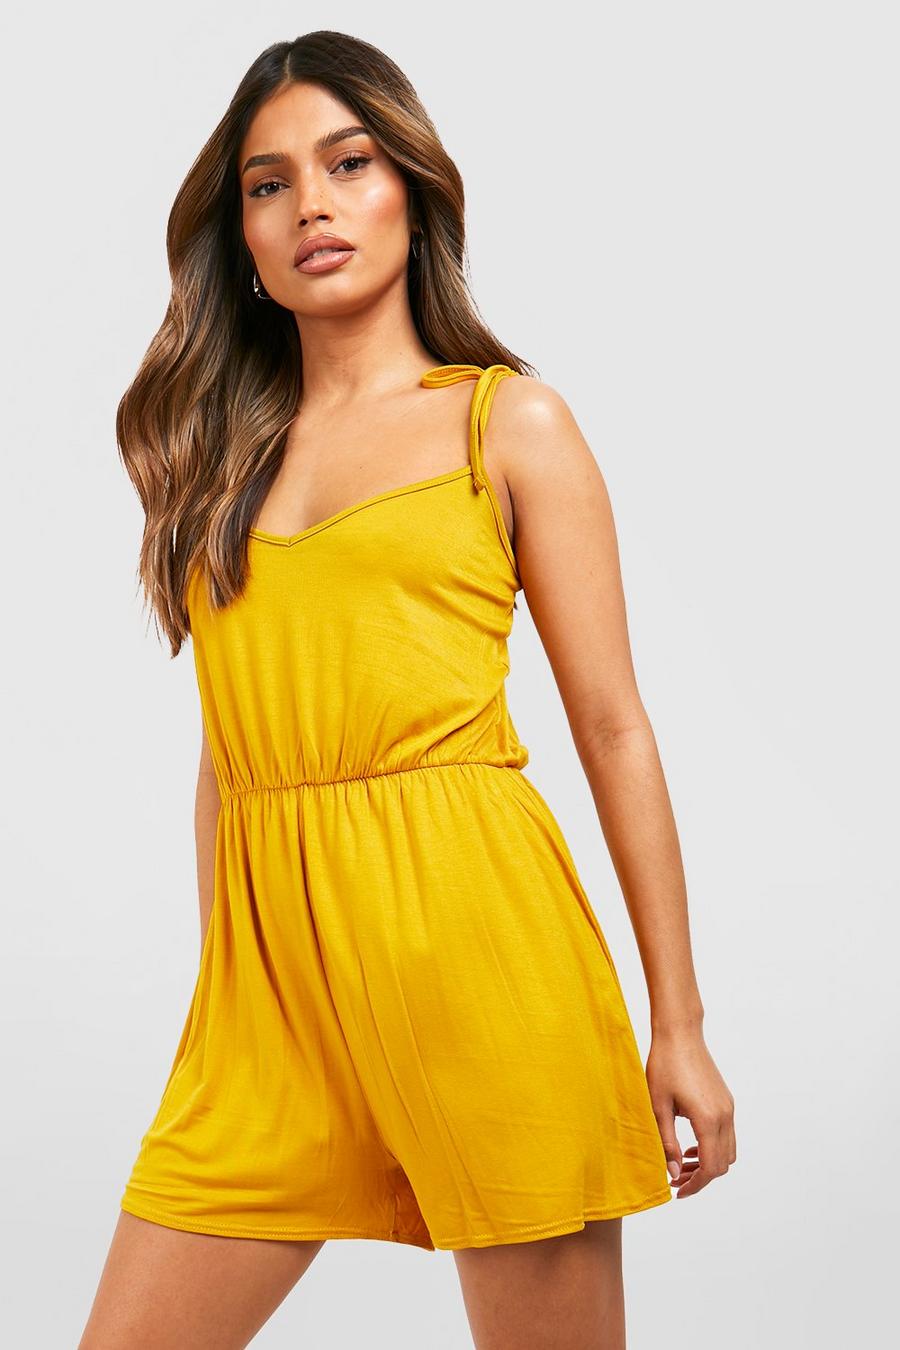 Mustard yellow Basic Strappy Playsuit